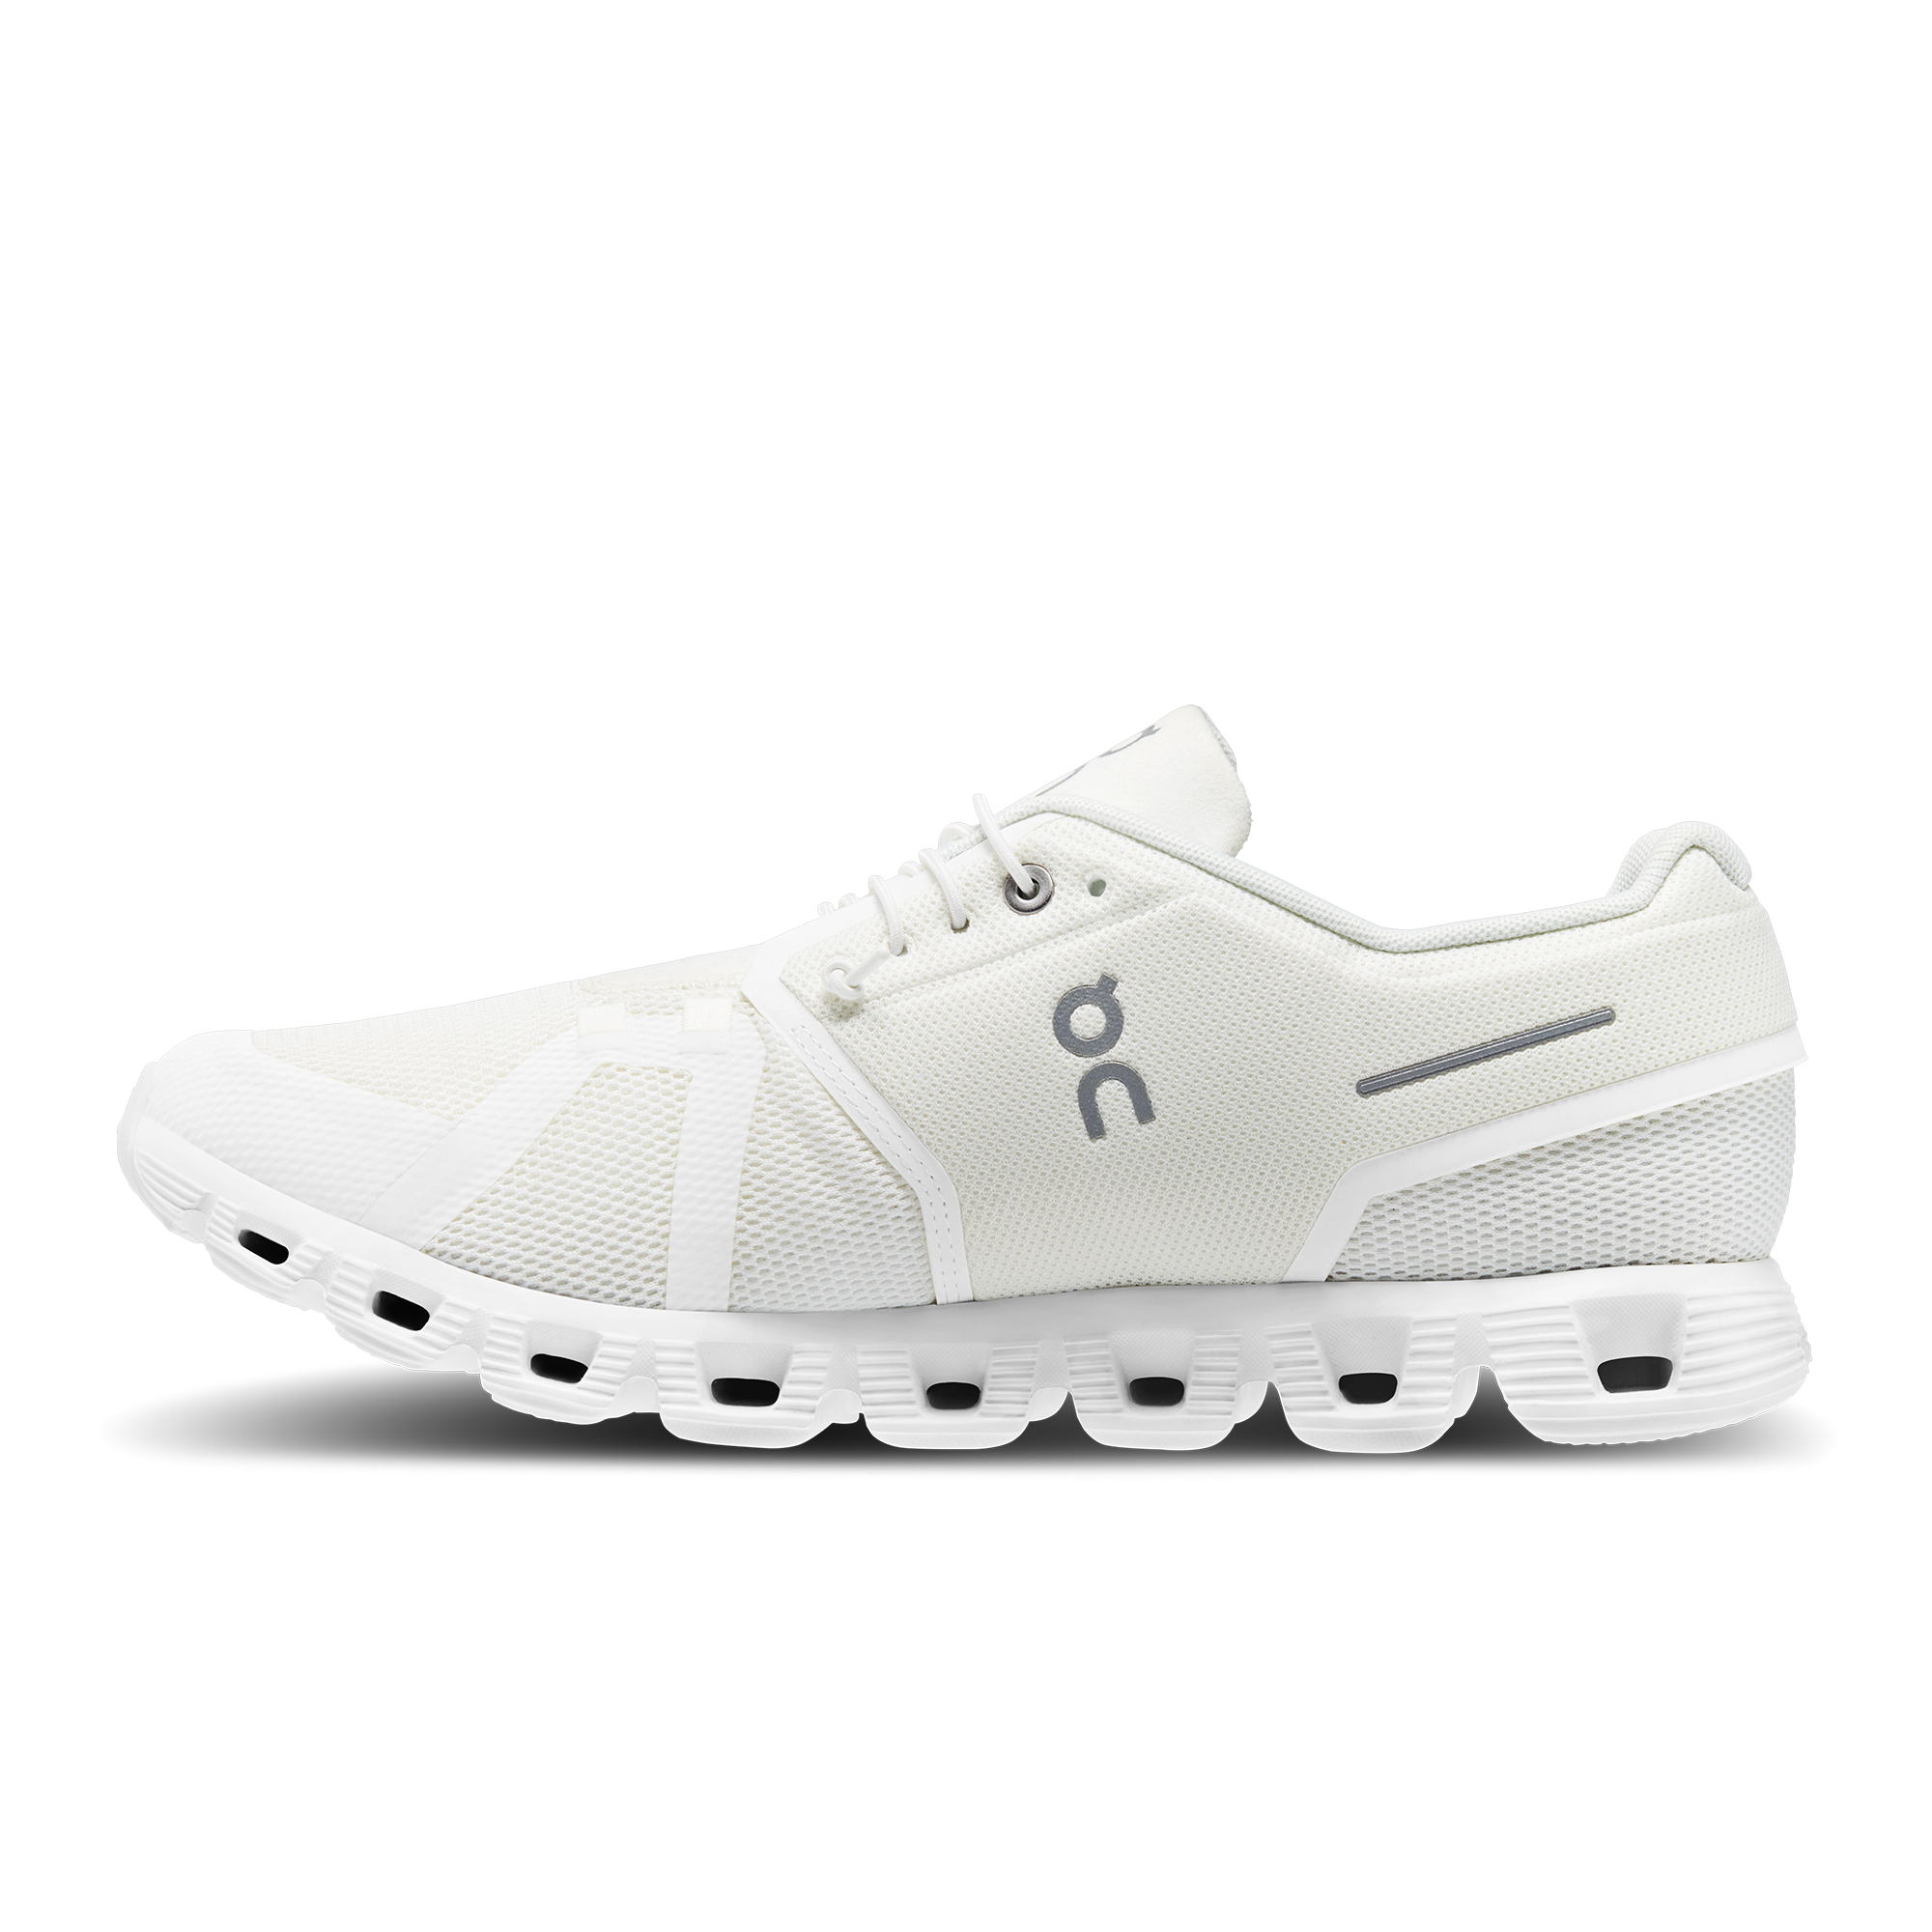 Medial view of the Men's Cloud 5 by ON in the color Undyed White/White